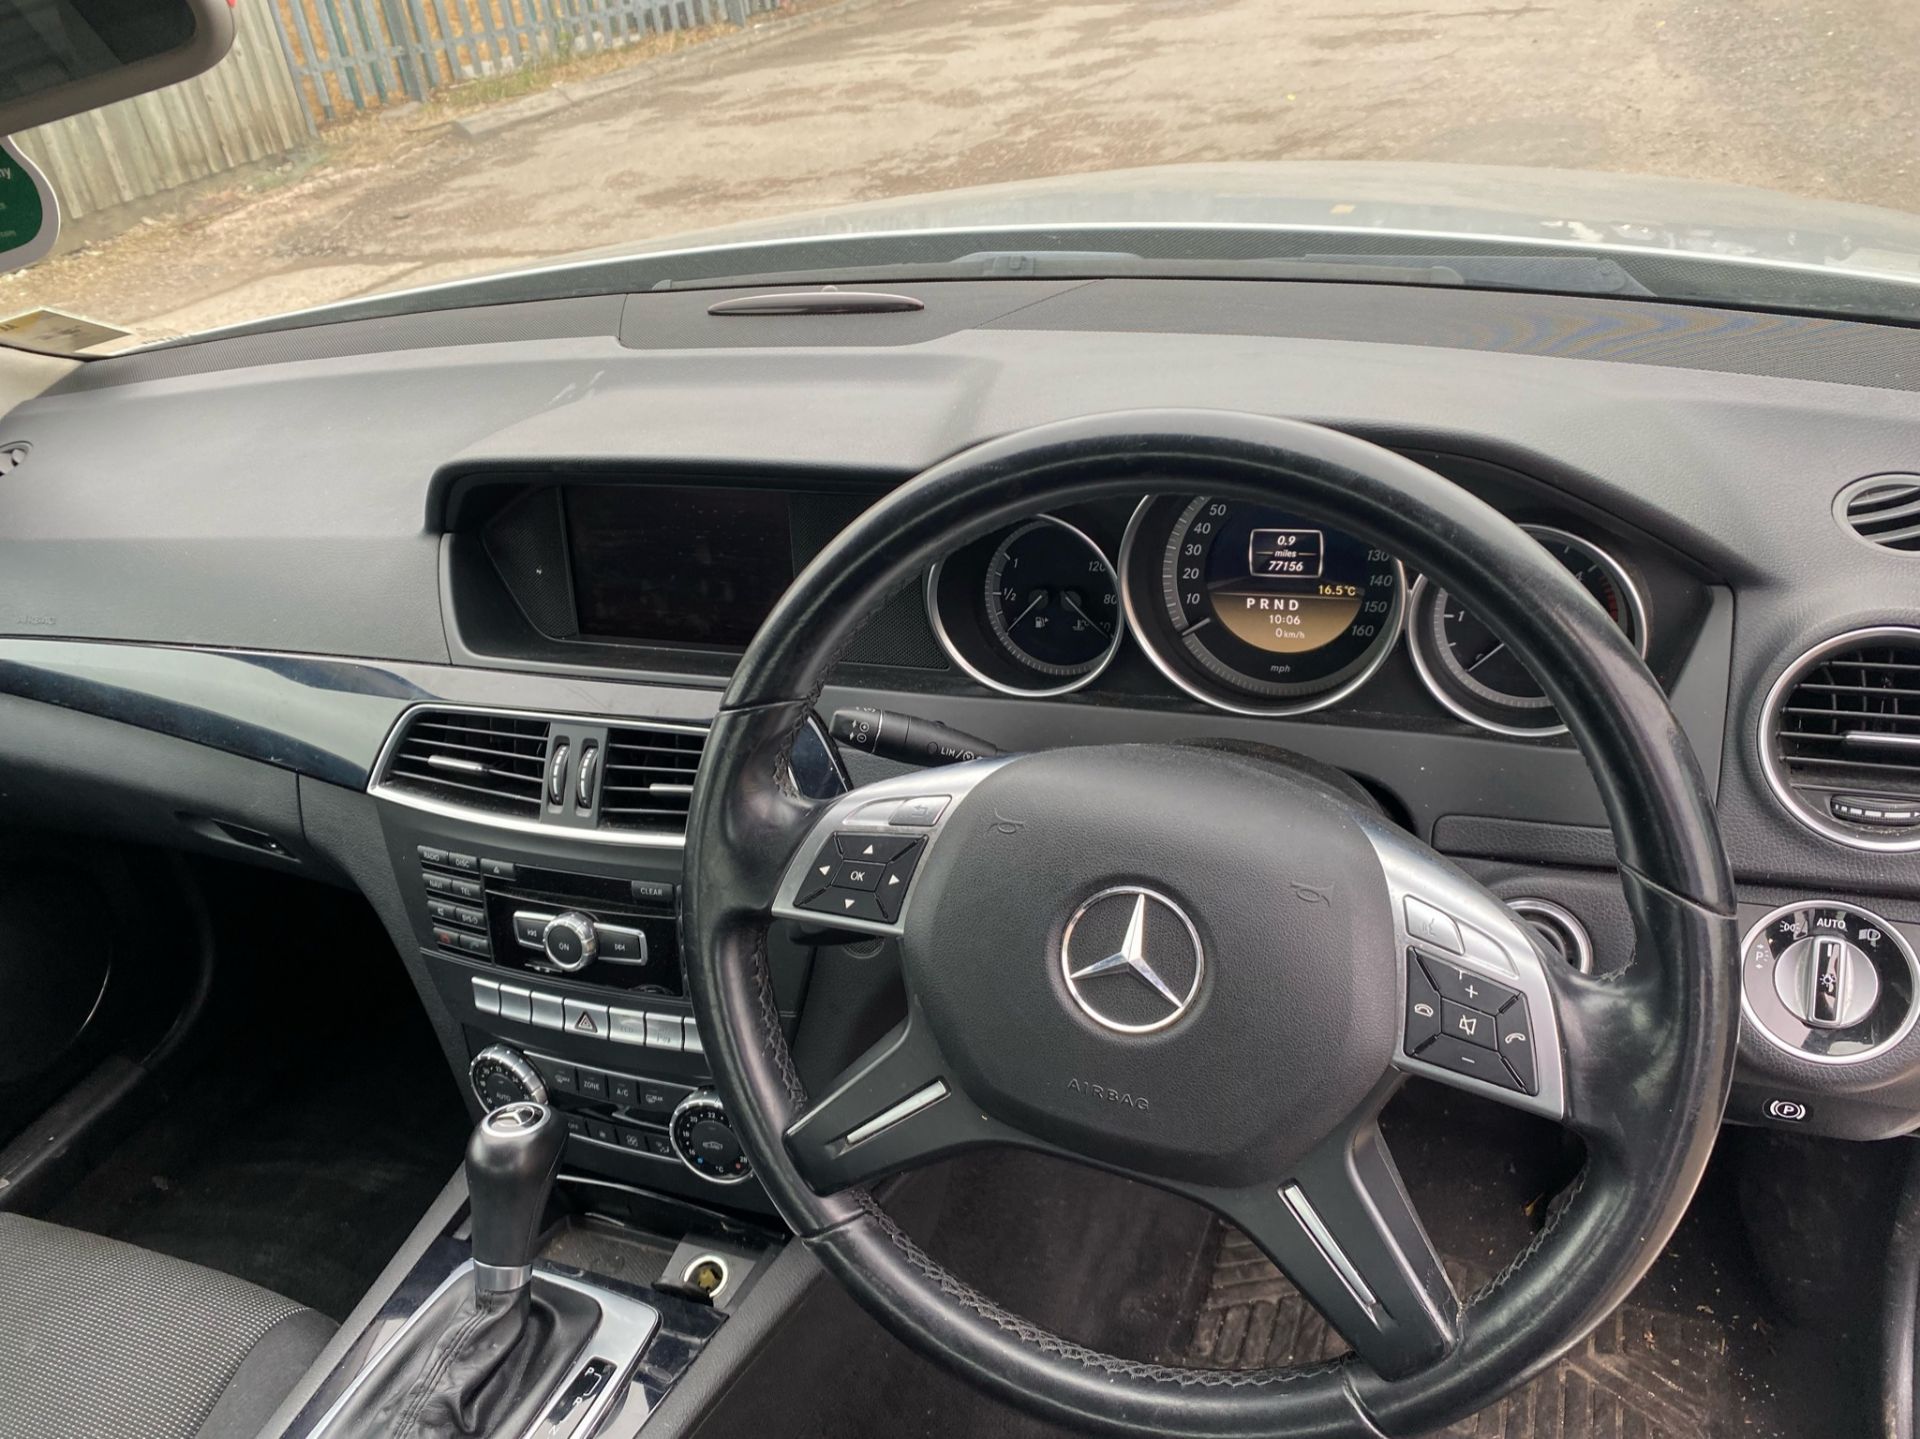 MERCEDES C220 CDI "BLUE EFFICIENCY" AUTO SPECIAL EQUIPMENT SALOON - 2012 MODEL - LOW MILES - LEATHER - Image 21 of 30